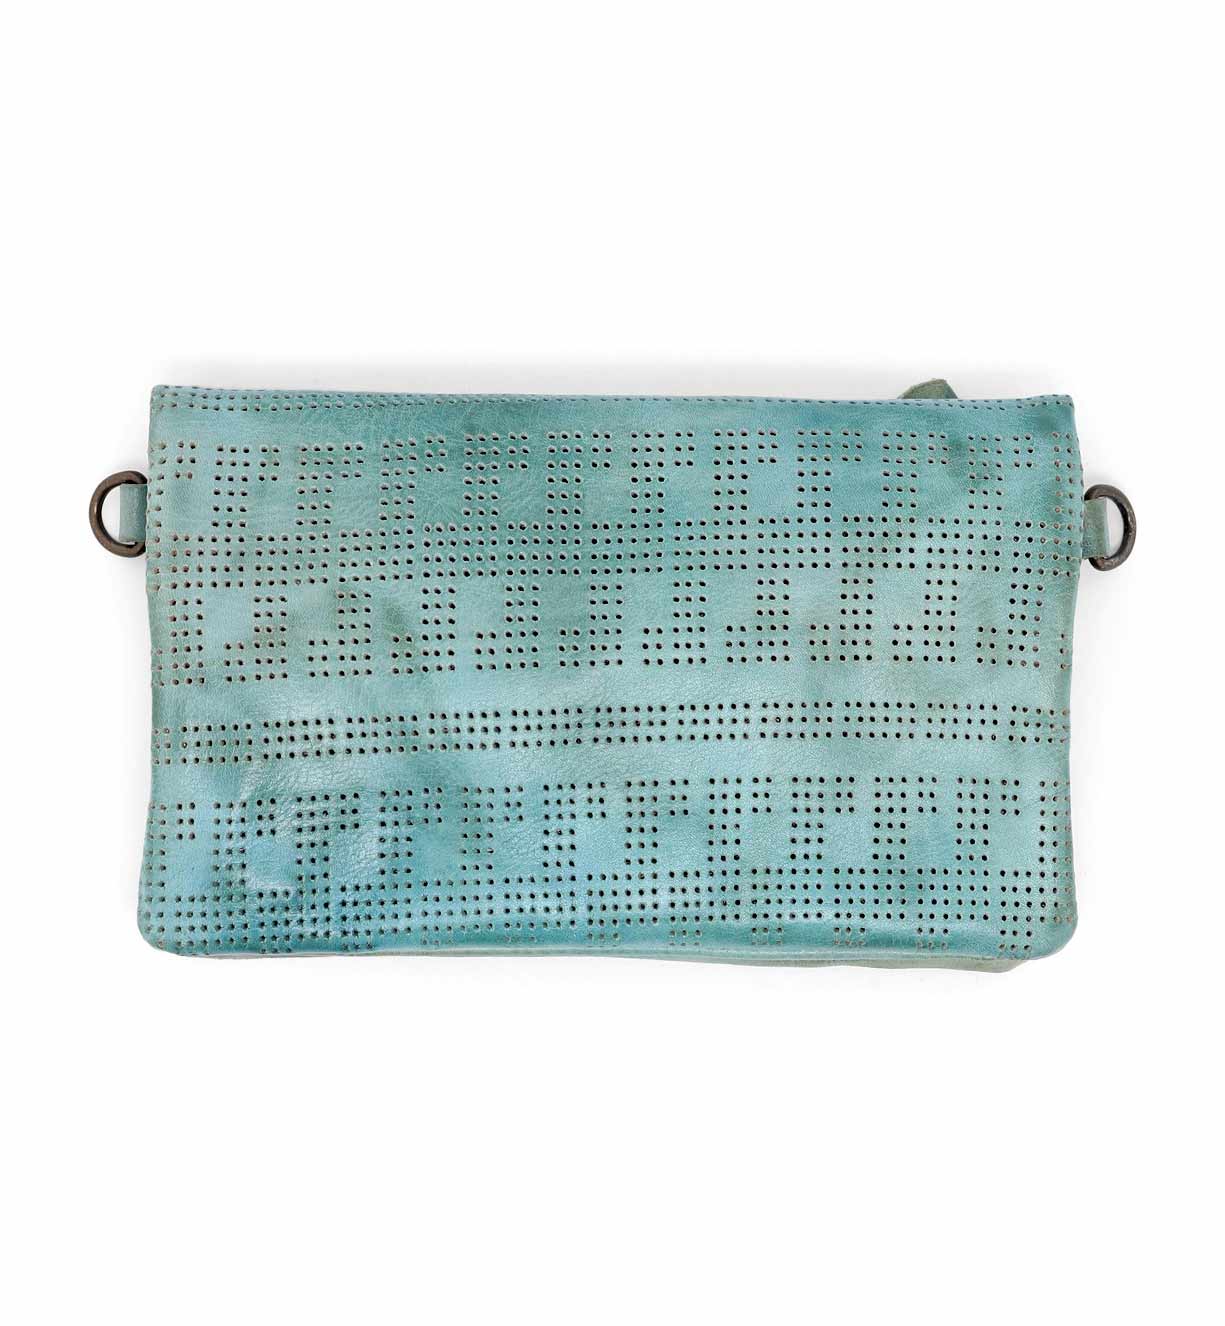 Bed Stu offers a versatile perforated leather clutch bag in a stunning turquoise color.